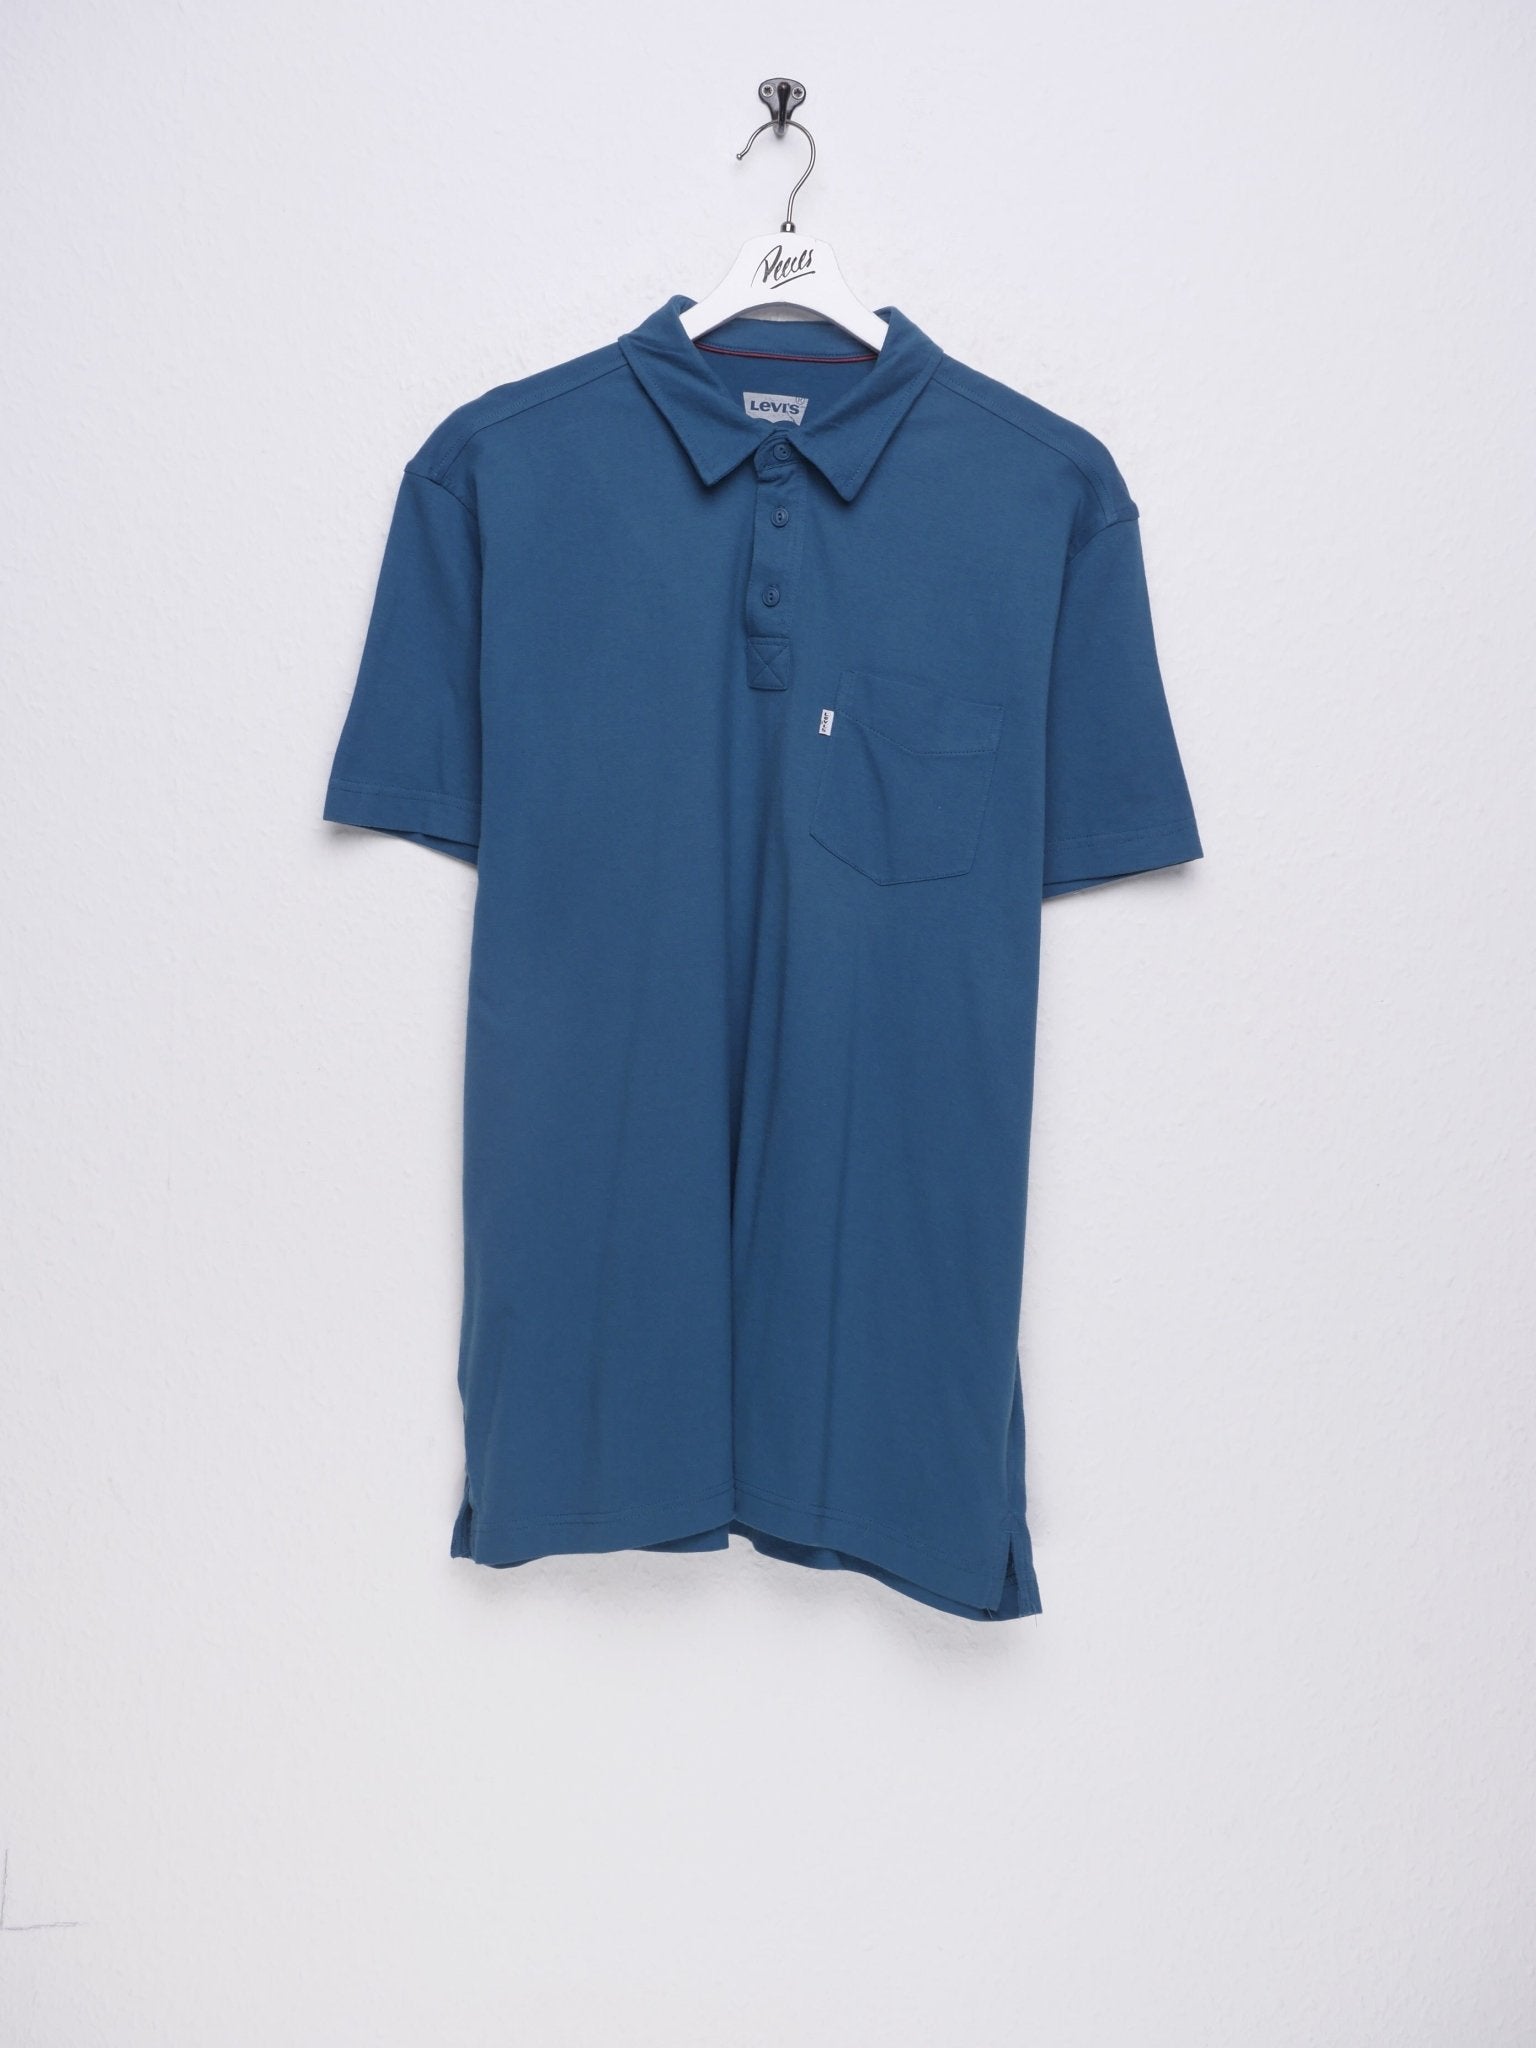 Levis patched Logo turquoise Polo Shirt - Peeces